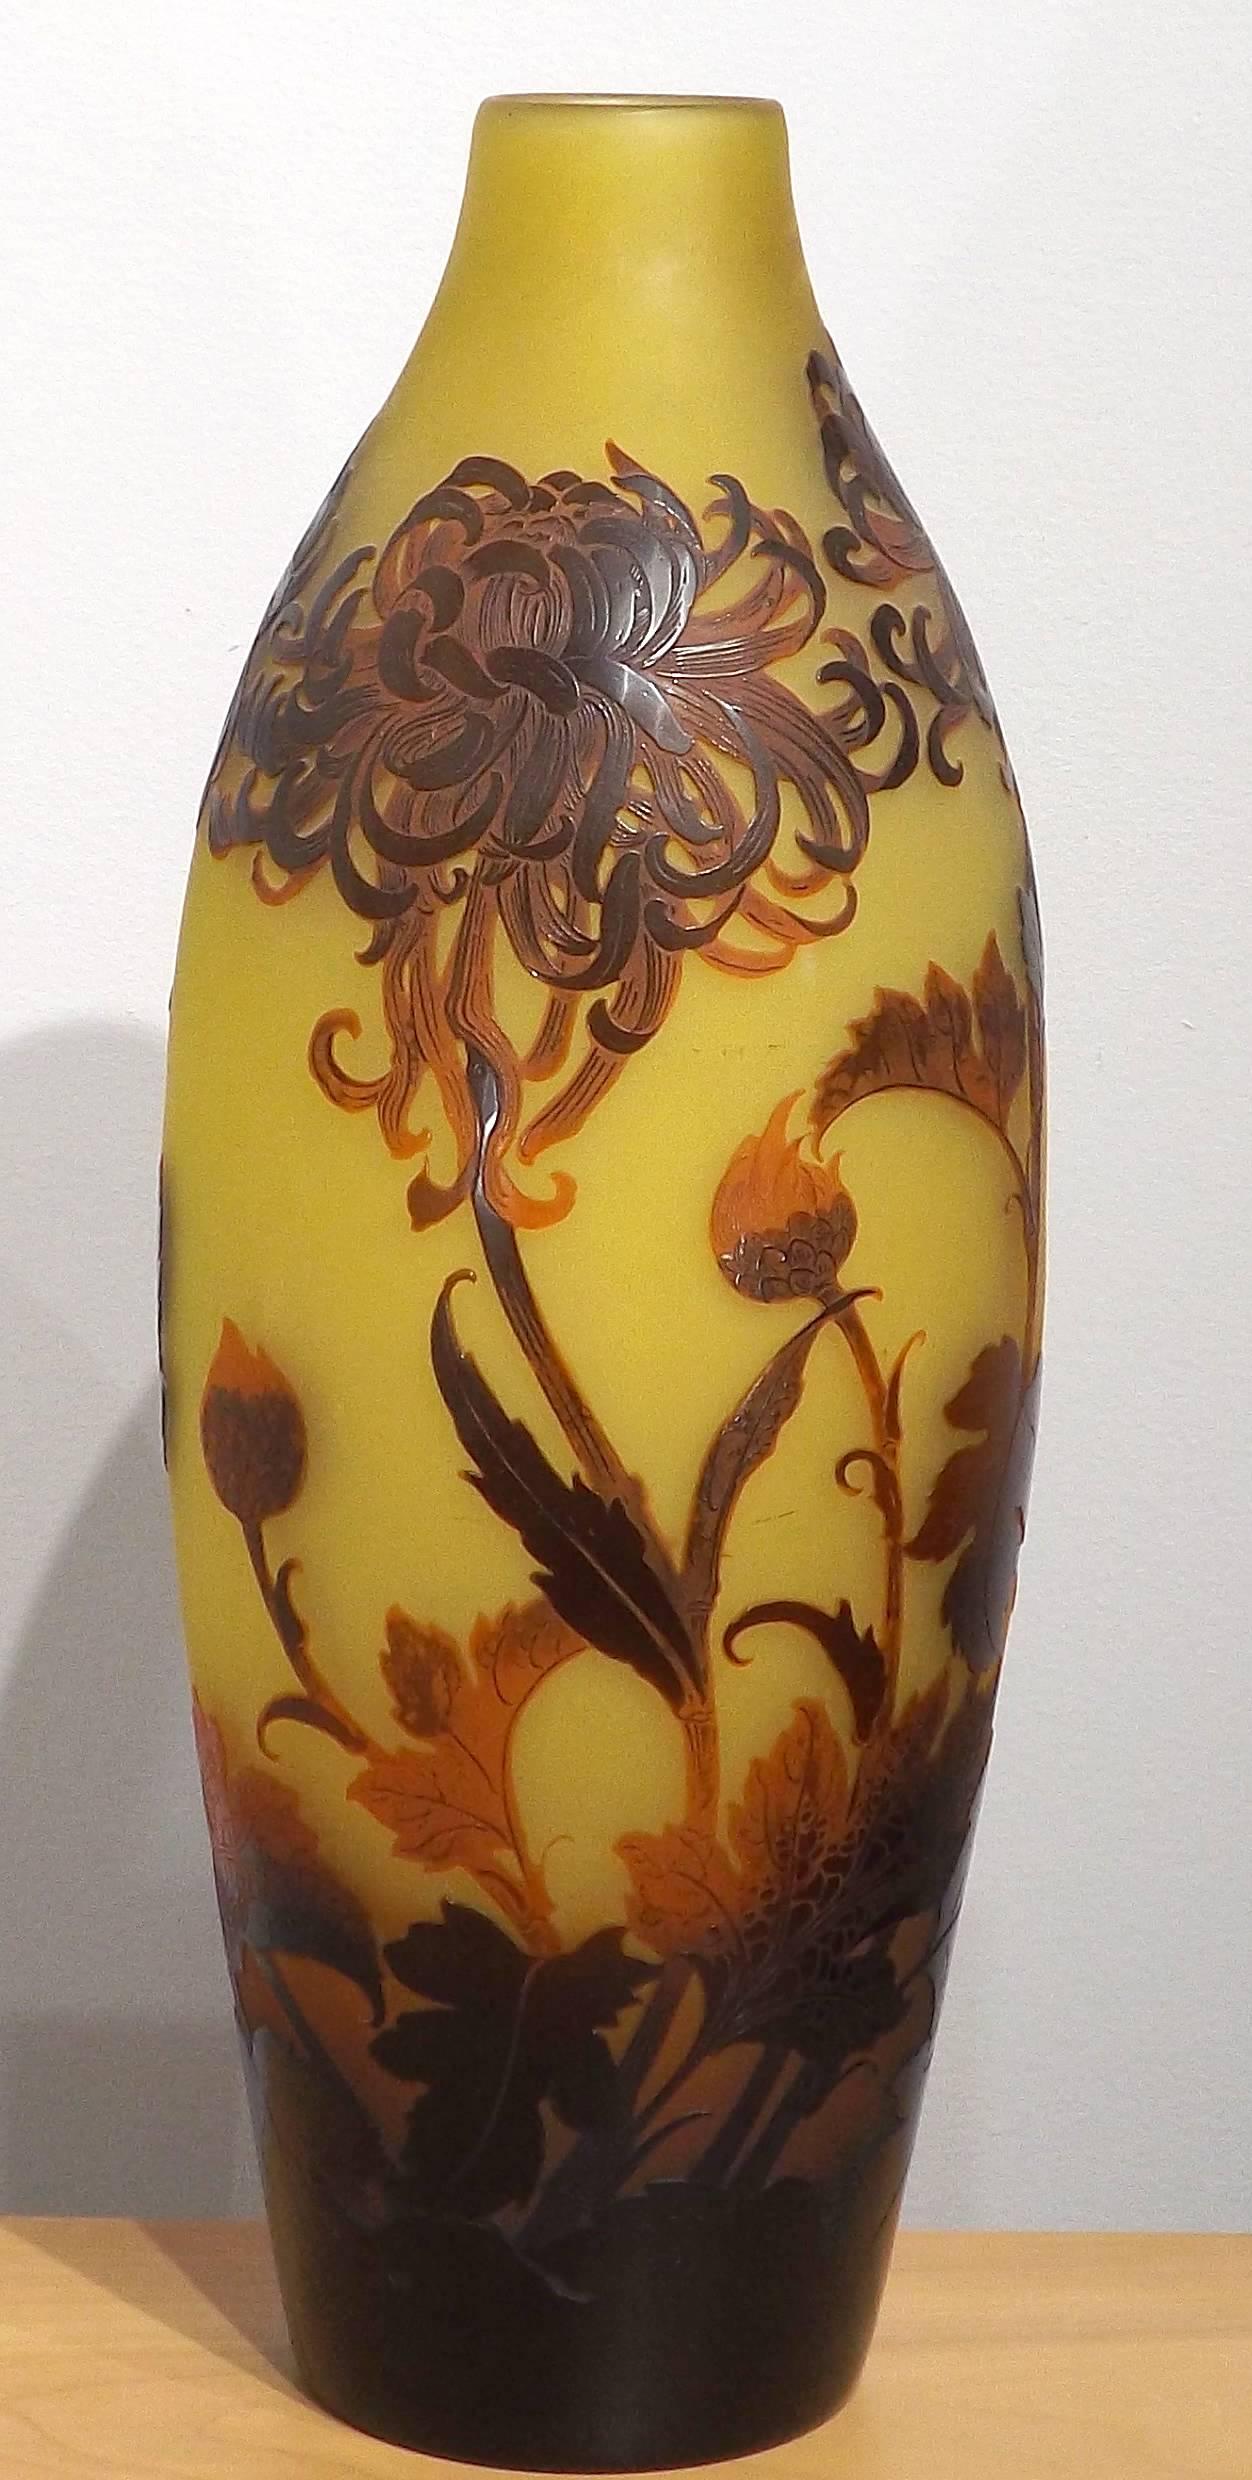 A tall and stunning D'Argental cameo vase decorated with spider mums. Wonderfully graceful leaves arc across the carved surface in amazing detail, the incised surface showcasing the skills of a master glassmaker.

D'Argental was the name given to